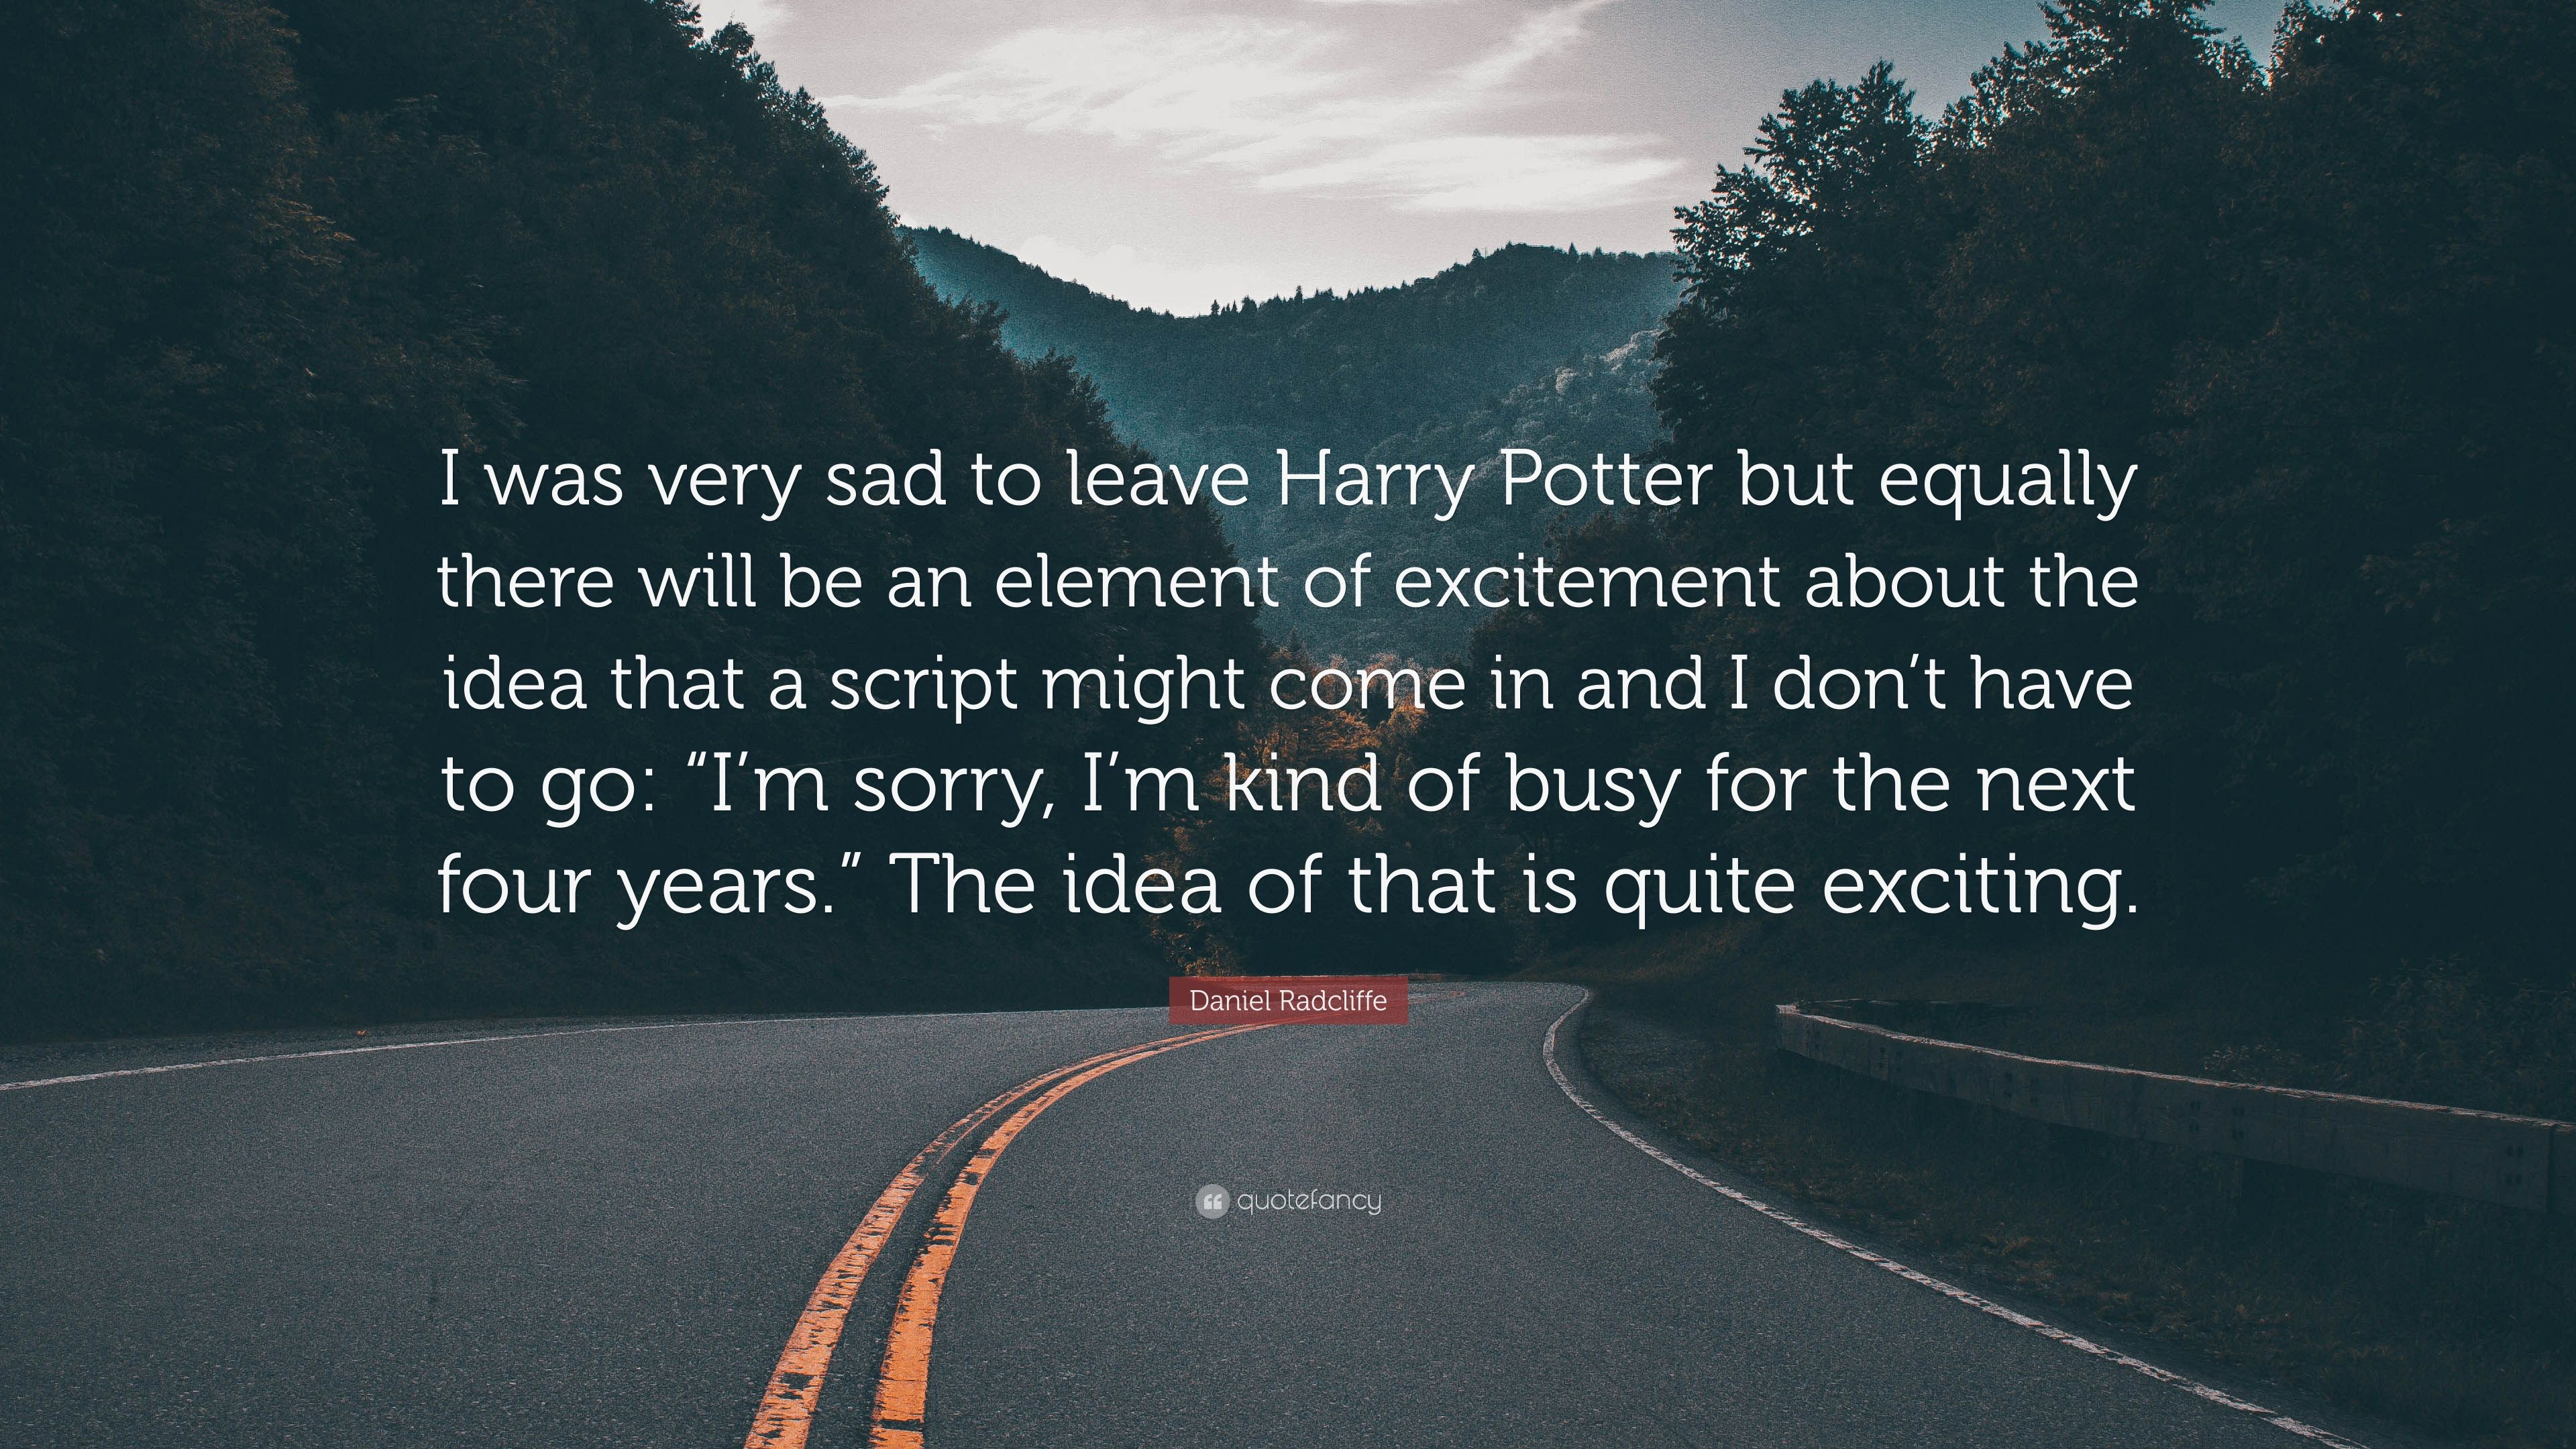 Daniel Radcliffe Quote: "I was very sad to leave Harry Potter but equa...